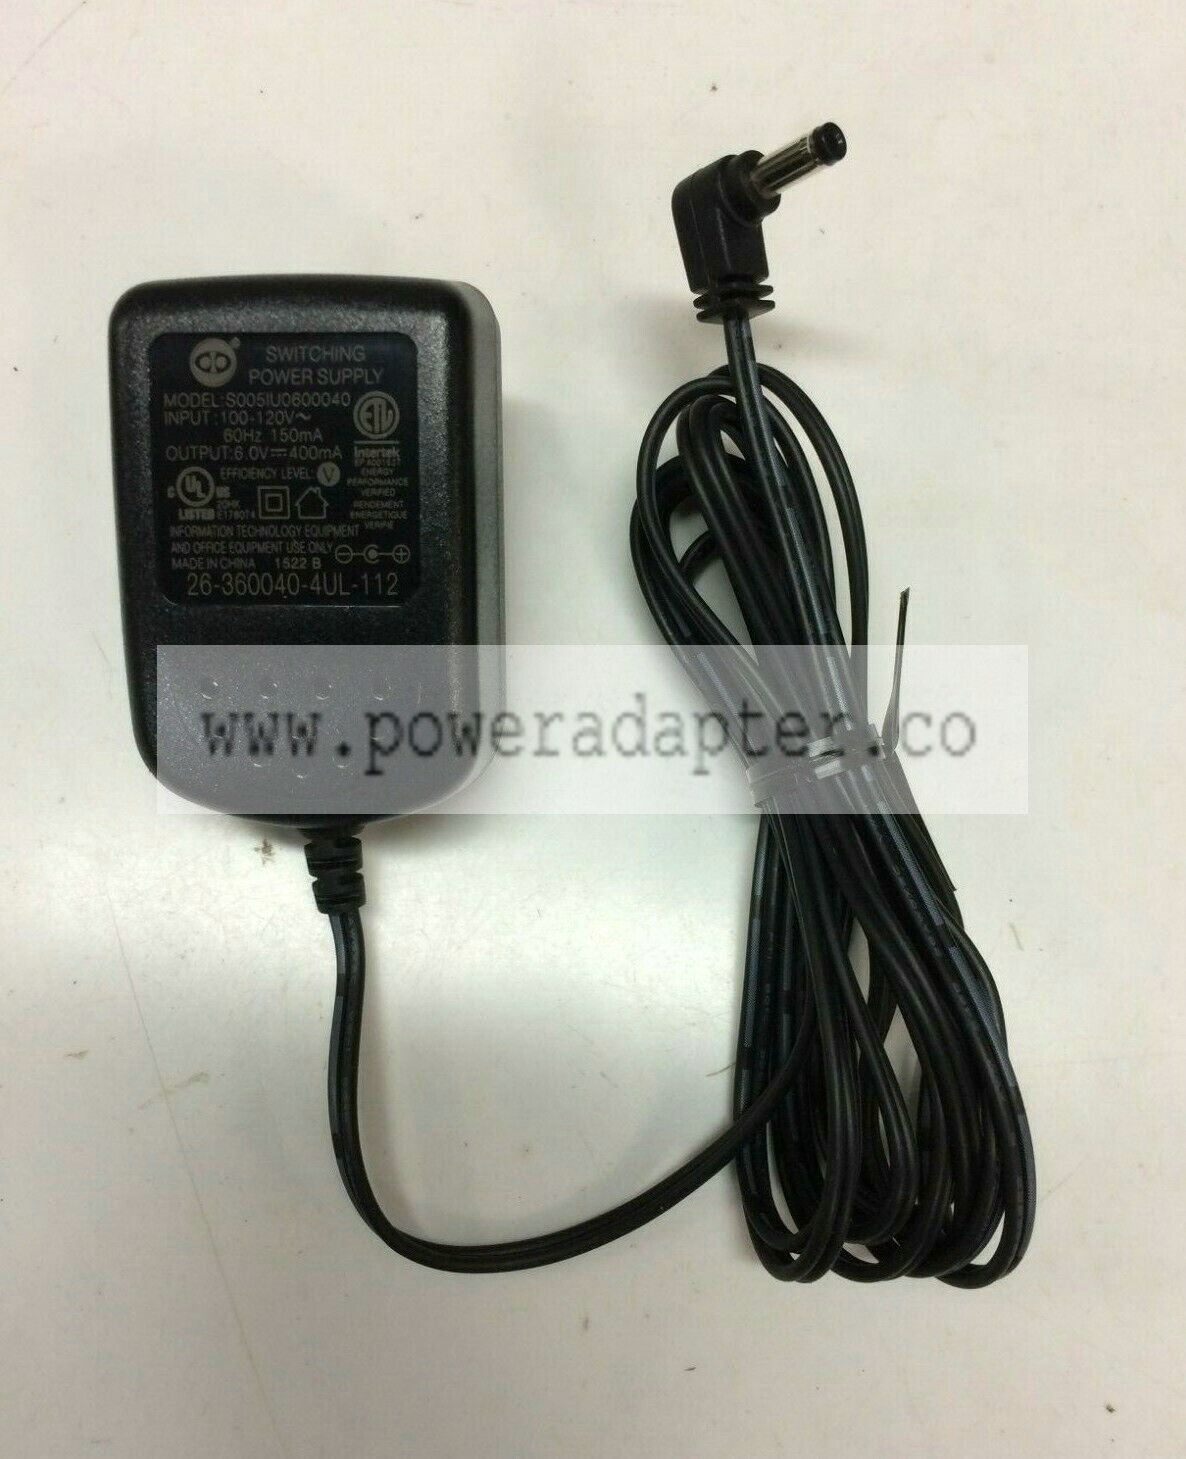 Genuine Vtech AT&T Charger Switching AC Adapter Power Supply S005IU0600040 6V MPN: S005IU0600040 Brand: Vtech, At&T